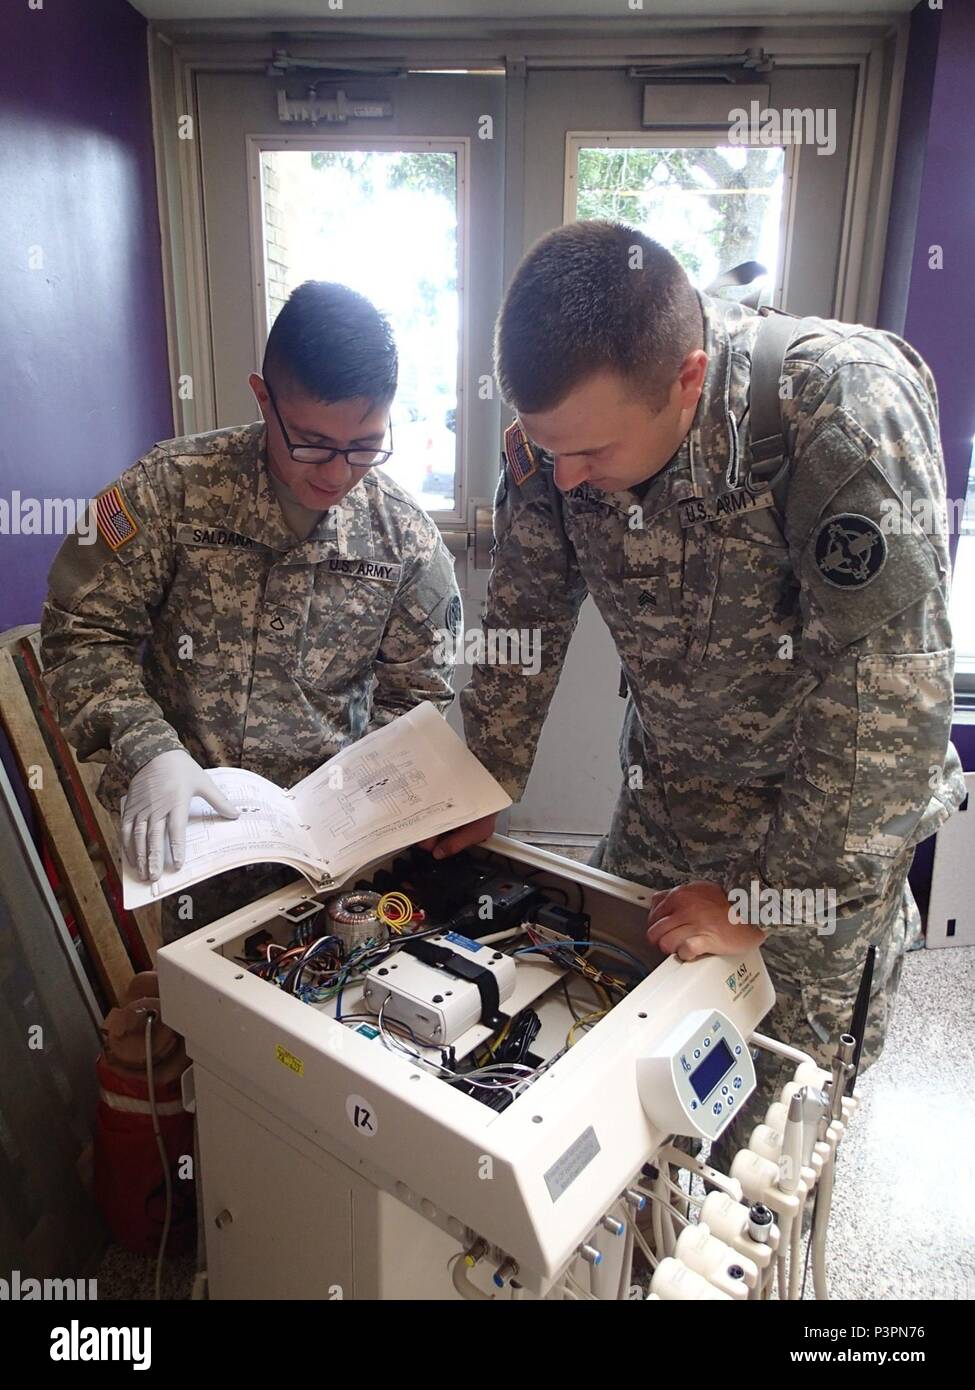 Sgt. Christopher Ramos, a biomedical technician from Company A, 48th Combat Support Hospital, Fort Story, Va., and Pfc. Albertico Saldana, a biomedical technician from the 341st Medical Logistics, Newtown Square, Pa. perform maintenance on a piece of dental equipment during Greater Chenango Cares, July 20, 2016.  Greater Chenango Cares is one of the Innovative Readiness Training events which provides real-world training in a joint civil-military environment while delivering world class, no-cost medical, dental, optometry and veterinary care to the people of Chenango County, N.Y., from July 15- Stock Photo